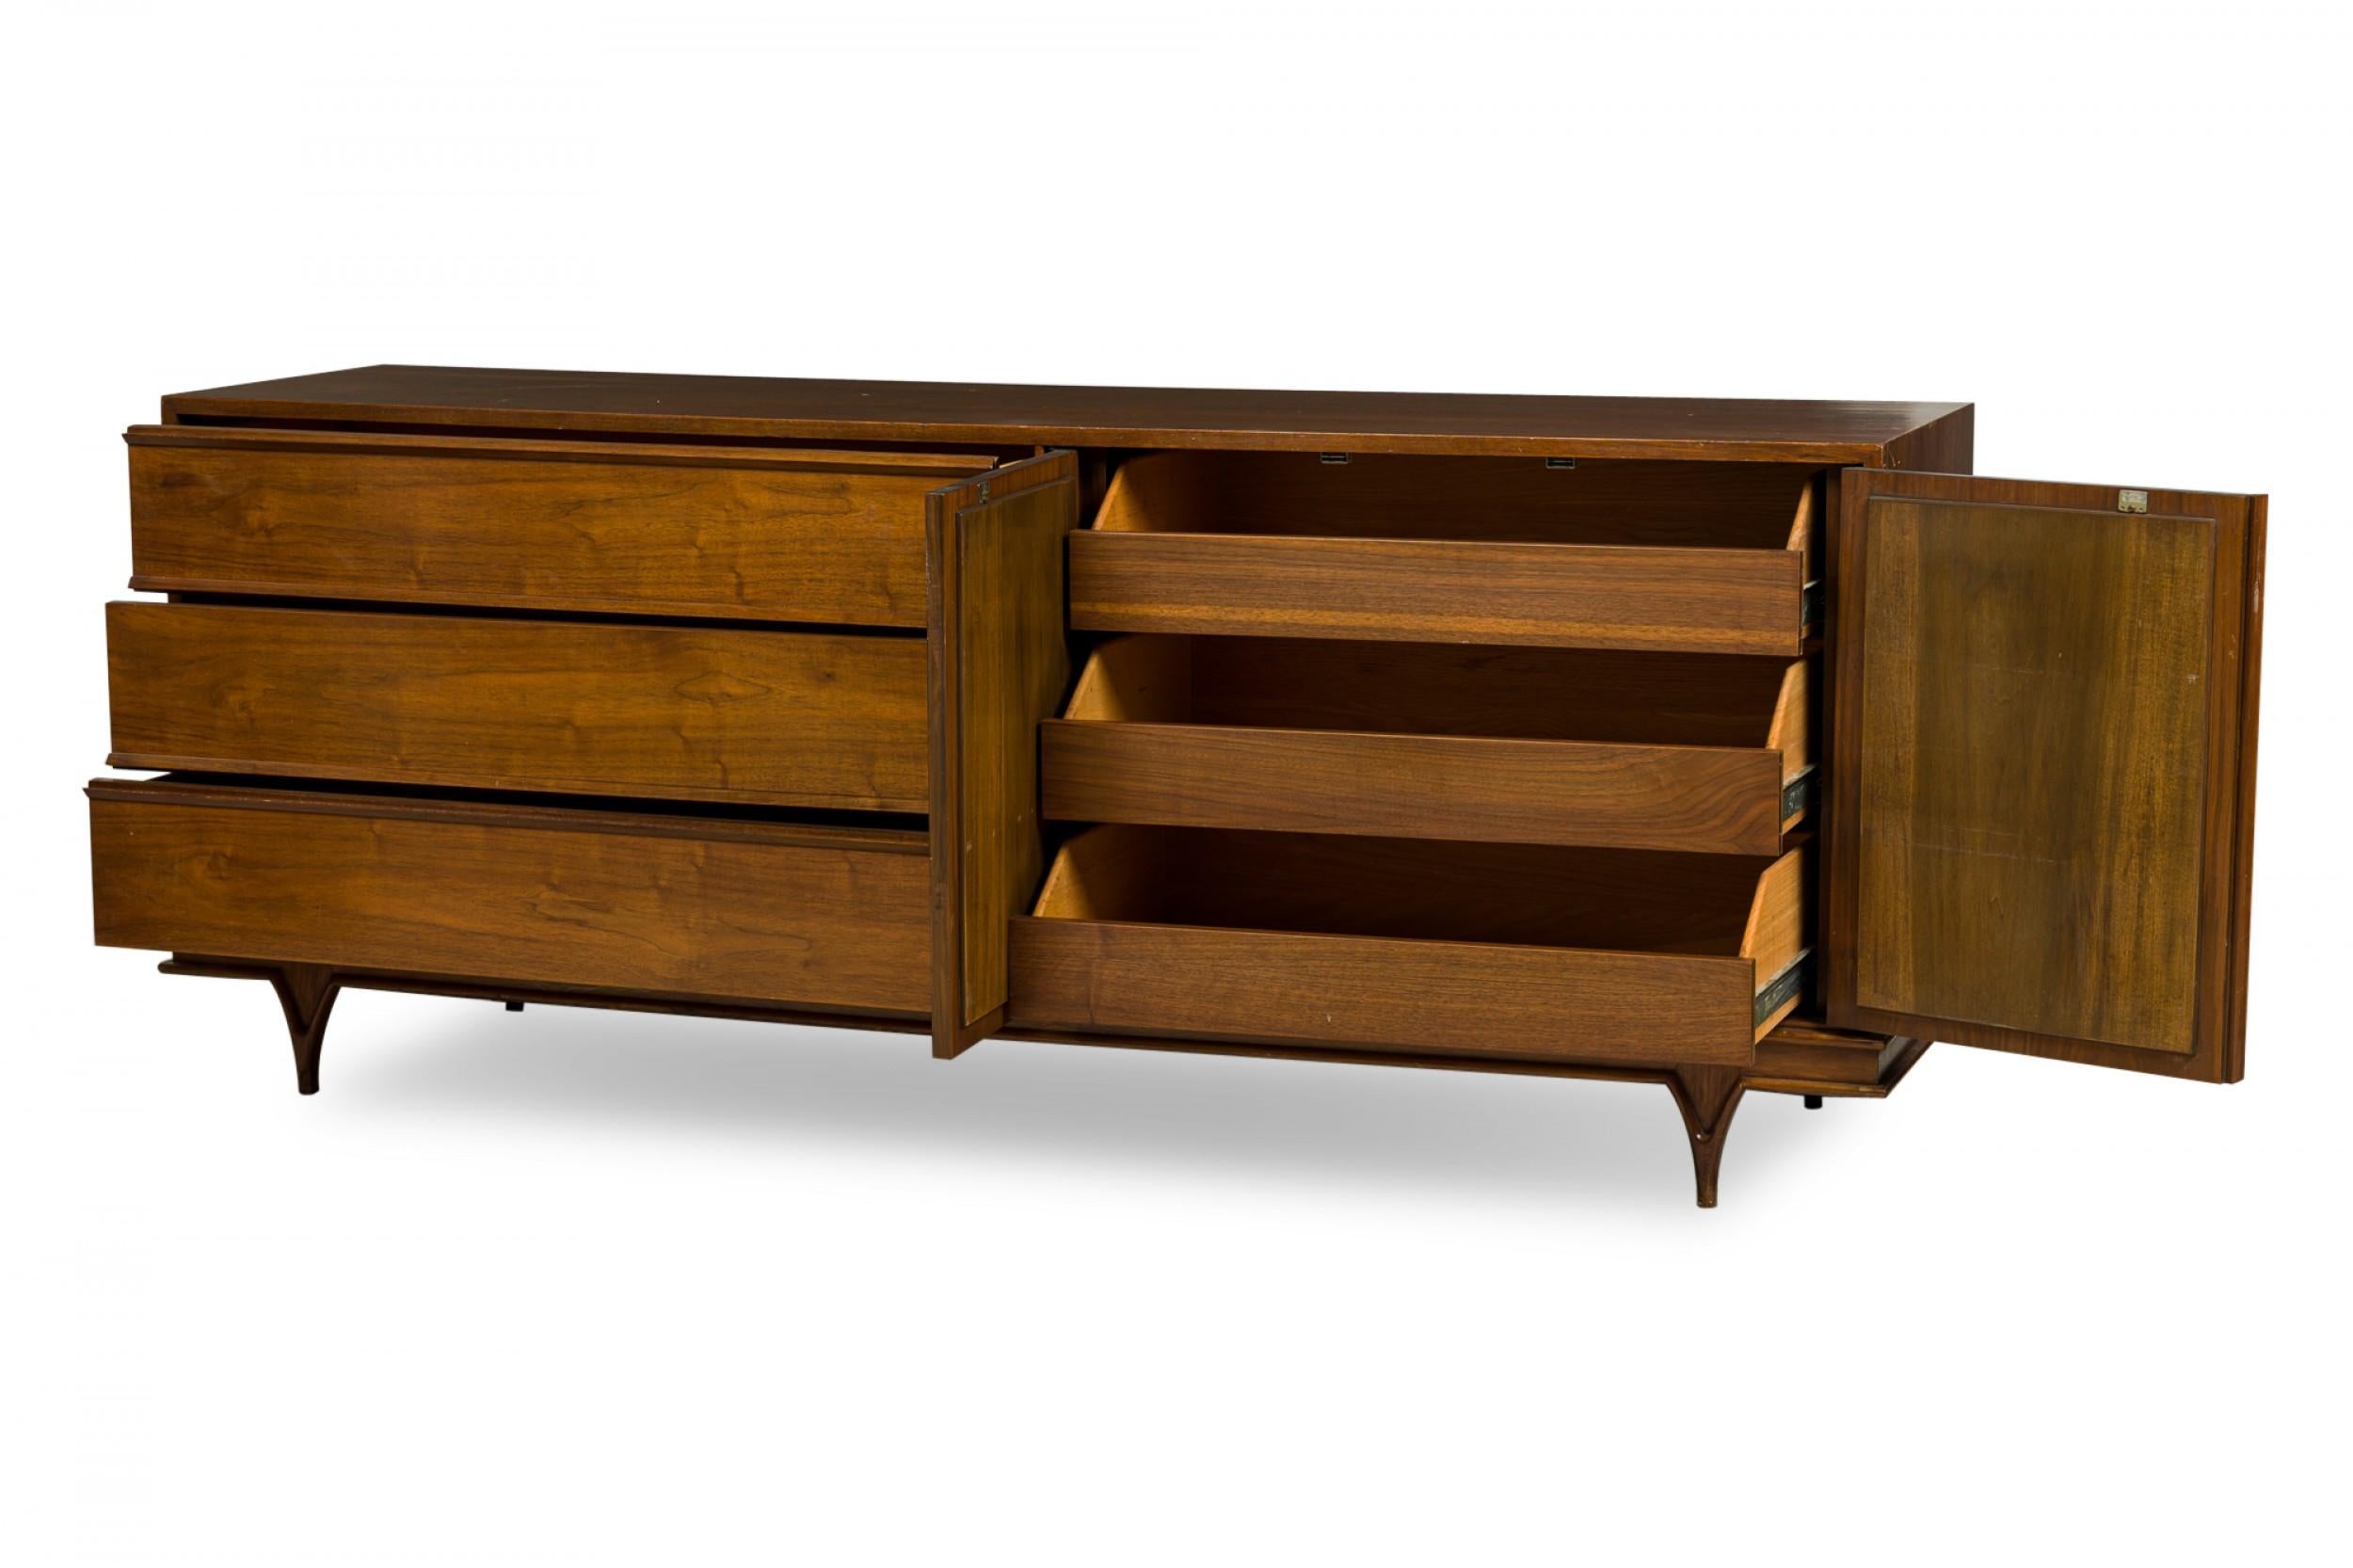 StanleyAmerican Mid-Century Modern Walnut Geometric Carved Front Sideboard For Sale 2